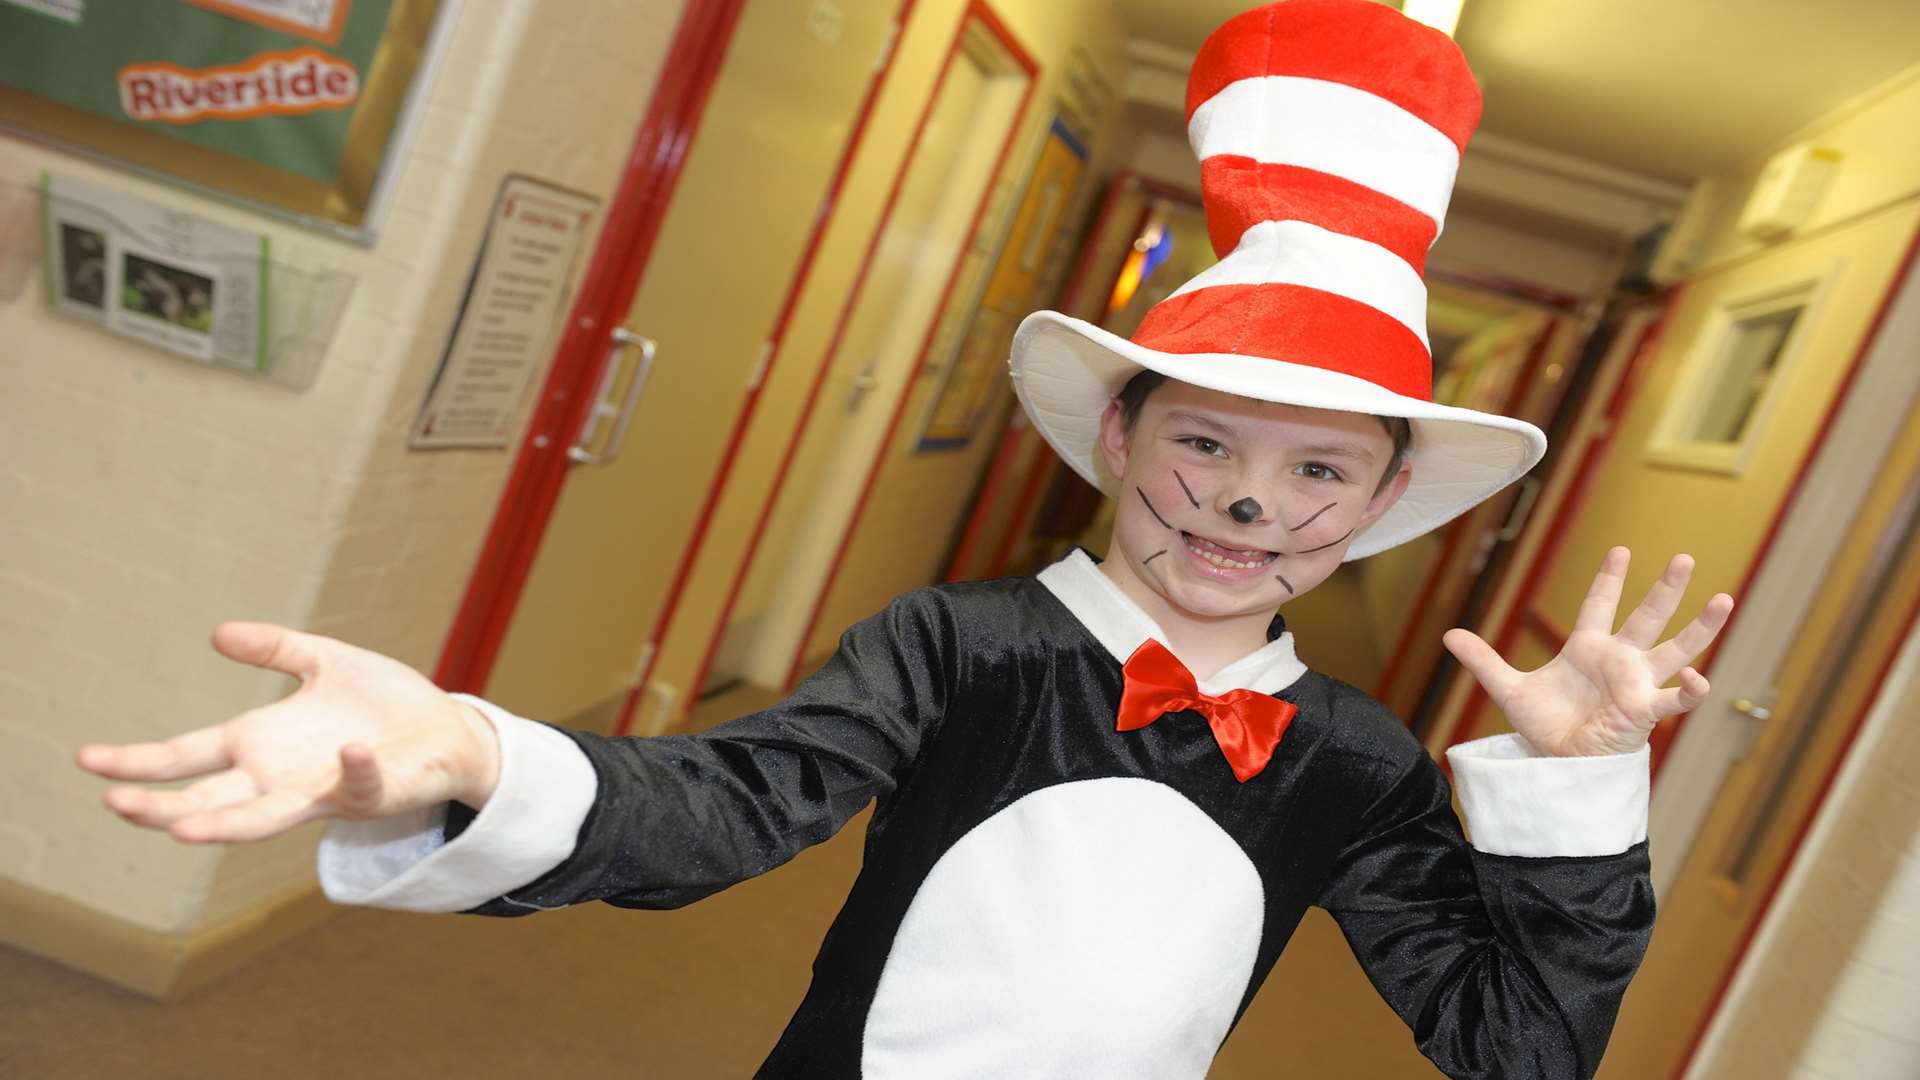 Owen, 7, The Cat in the Hat. Dressing up for World Book Day at Riverside Primary School, Rainham.